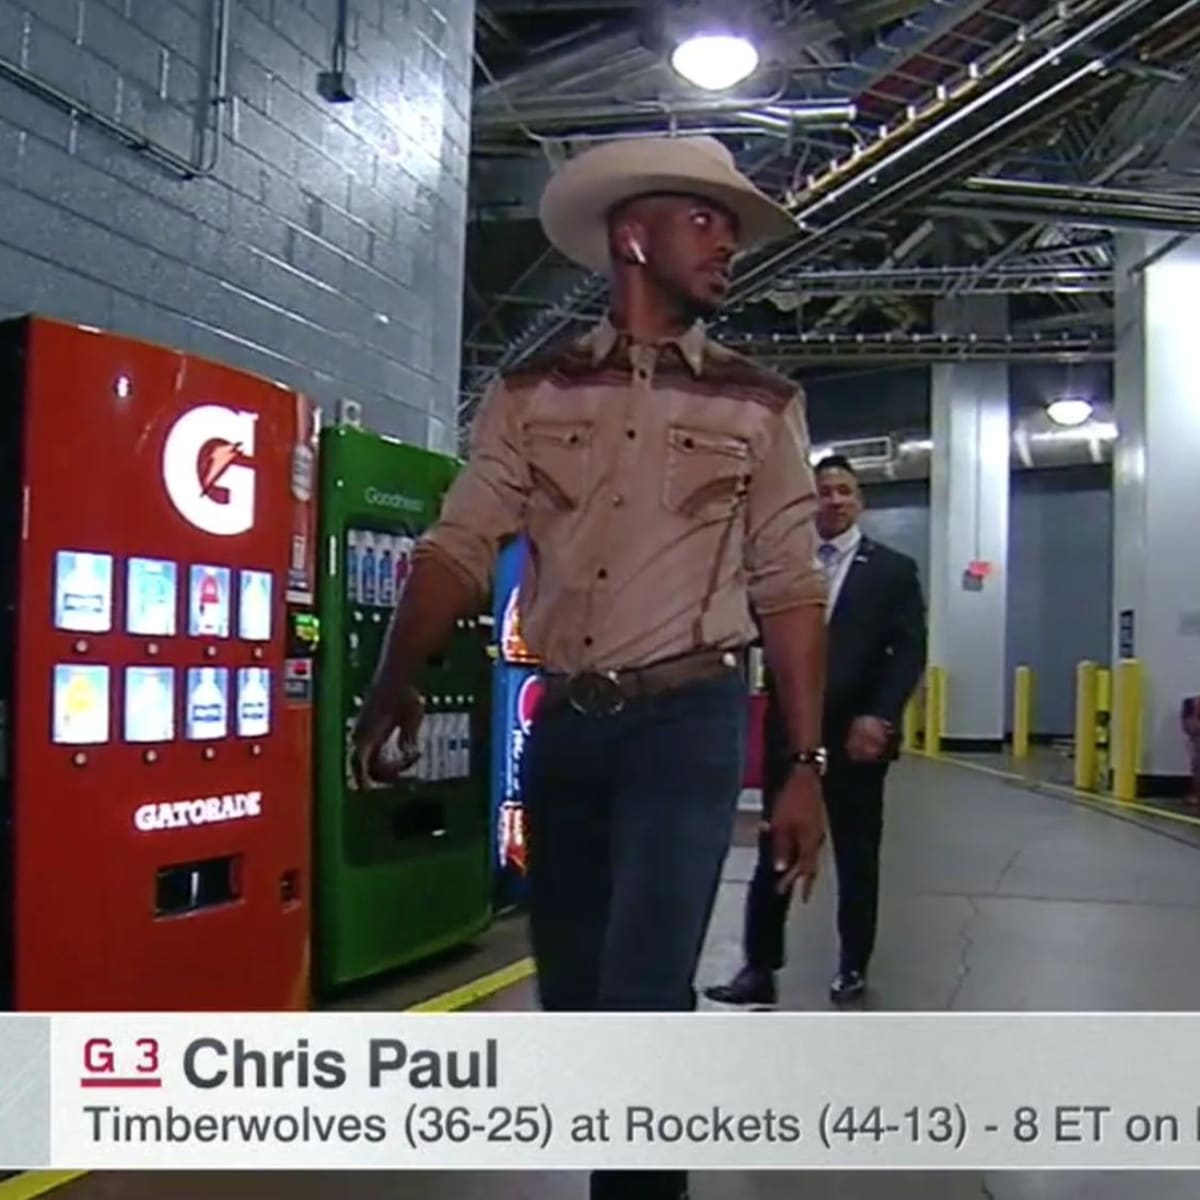 Chris Paul Shows Up To The Game In Cowboy Attire, CP3 with the cowboy  outfit! 🔥, By NBA Memes